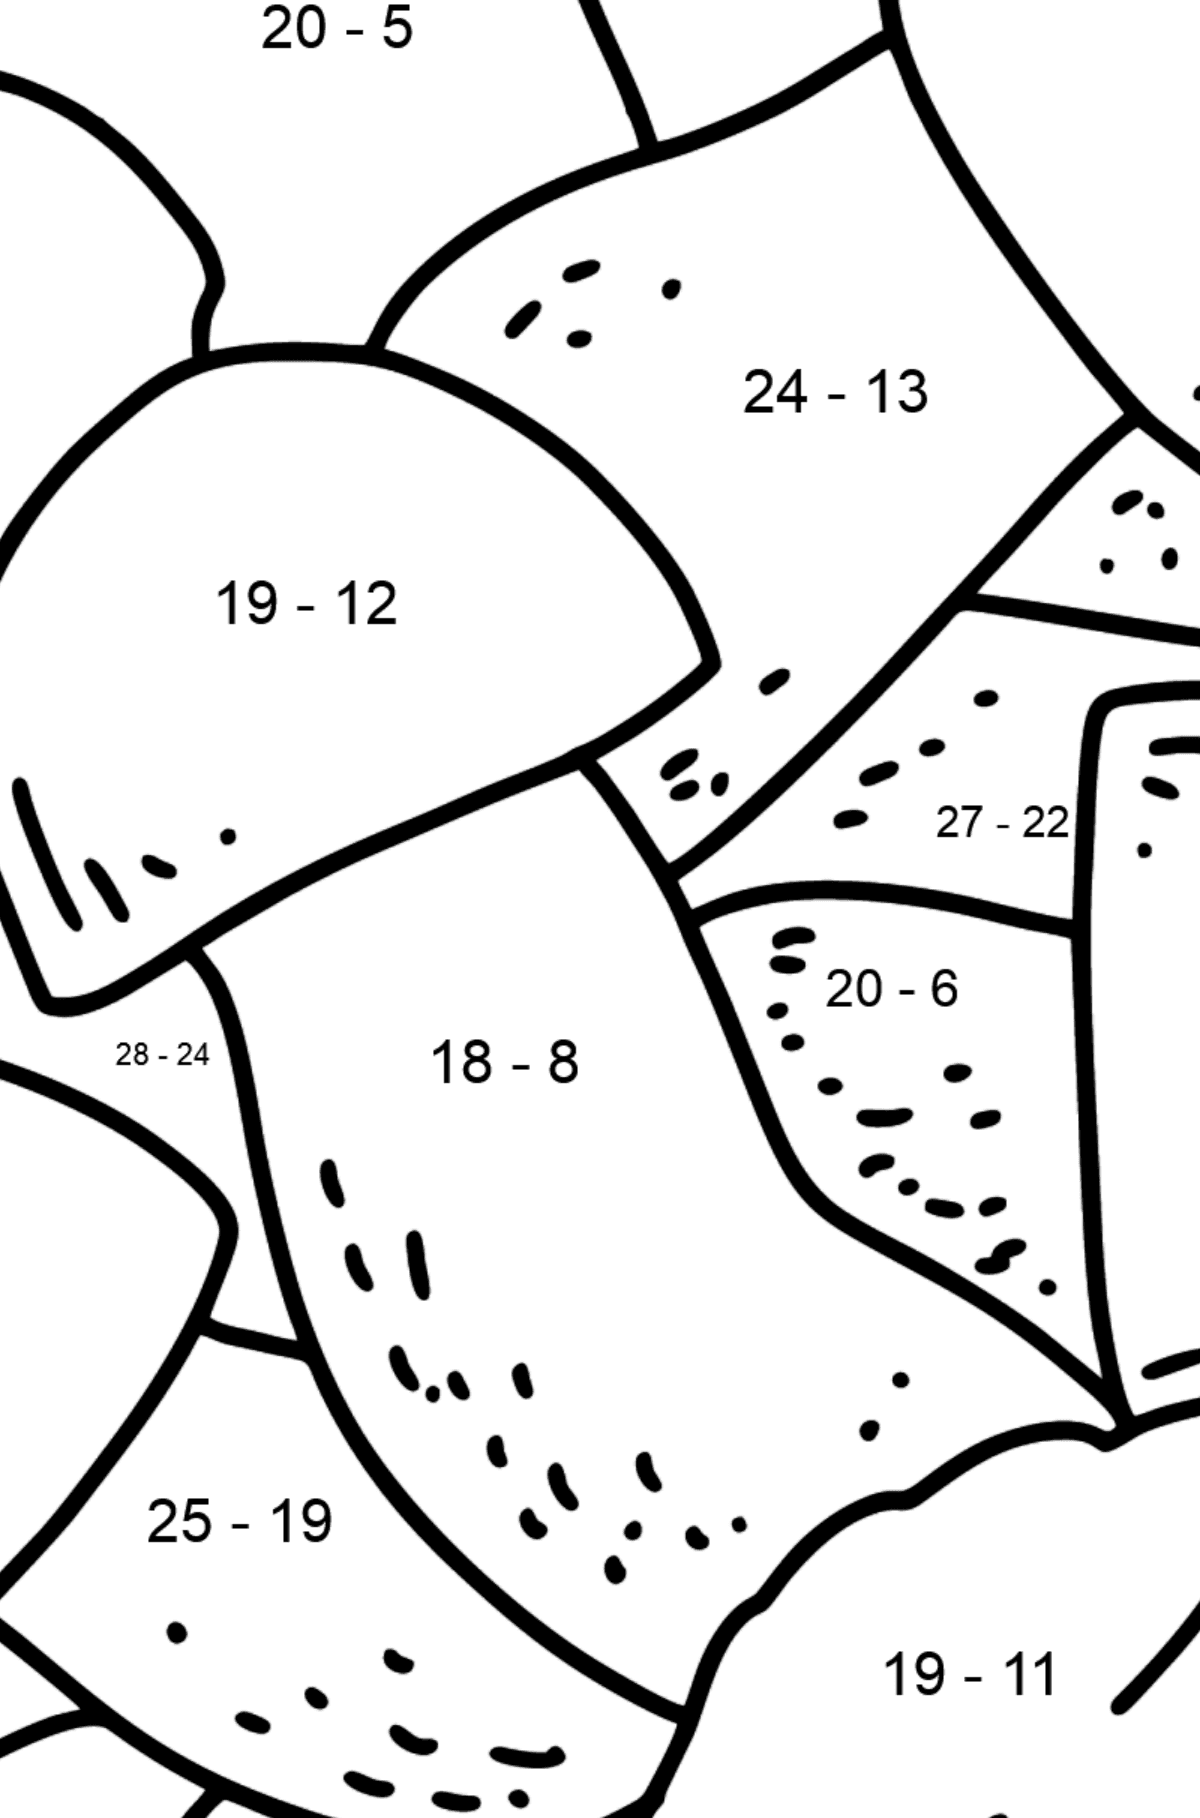 Boletus coloring page - Math Coloring - Subtraction for Kids